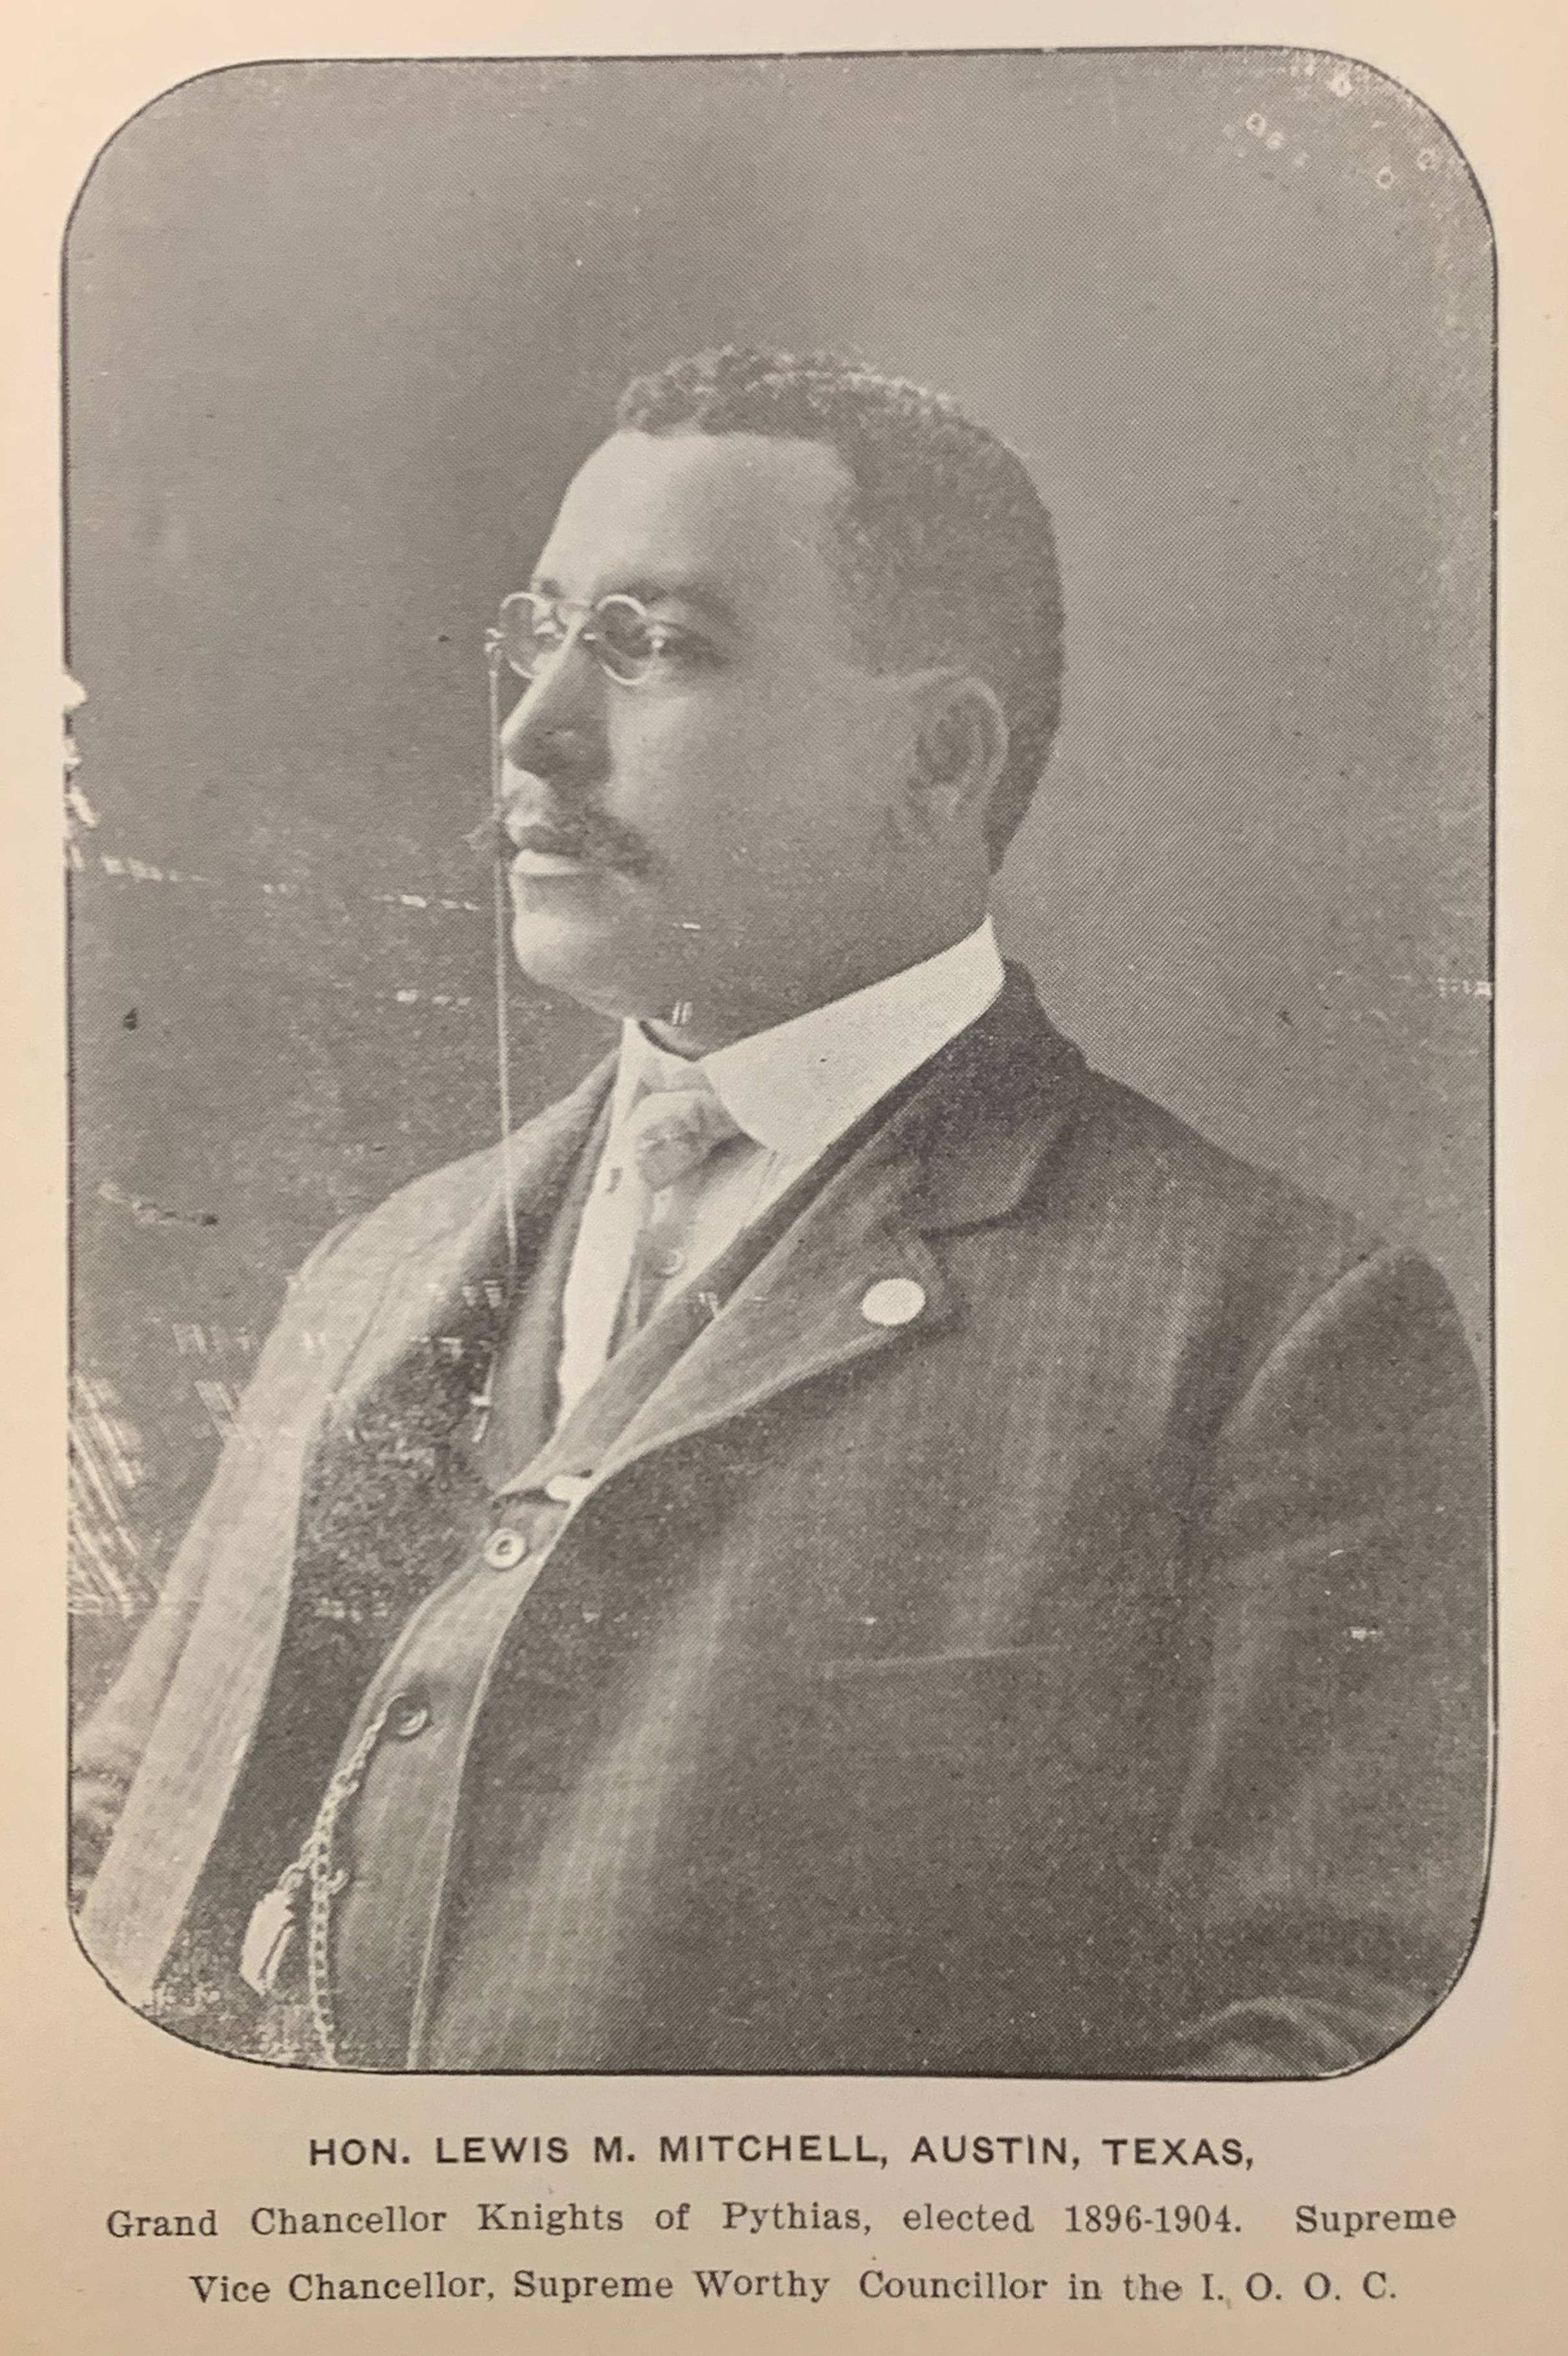 African-American man in suit and glasses, 1900's. Text reads: Hon. Lewis M. Mitchell, Austin. Texas, Grand Chancellor Knights of Pythias, elected 1896-1904. Supreme Vice Chancellor, Supreme Worthy Councilor in the I.O.O.C.